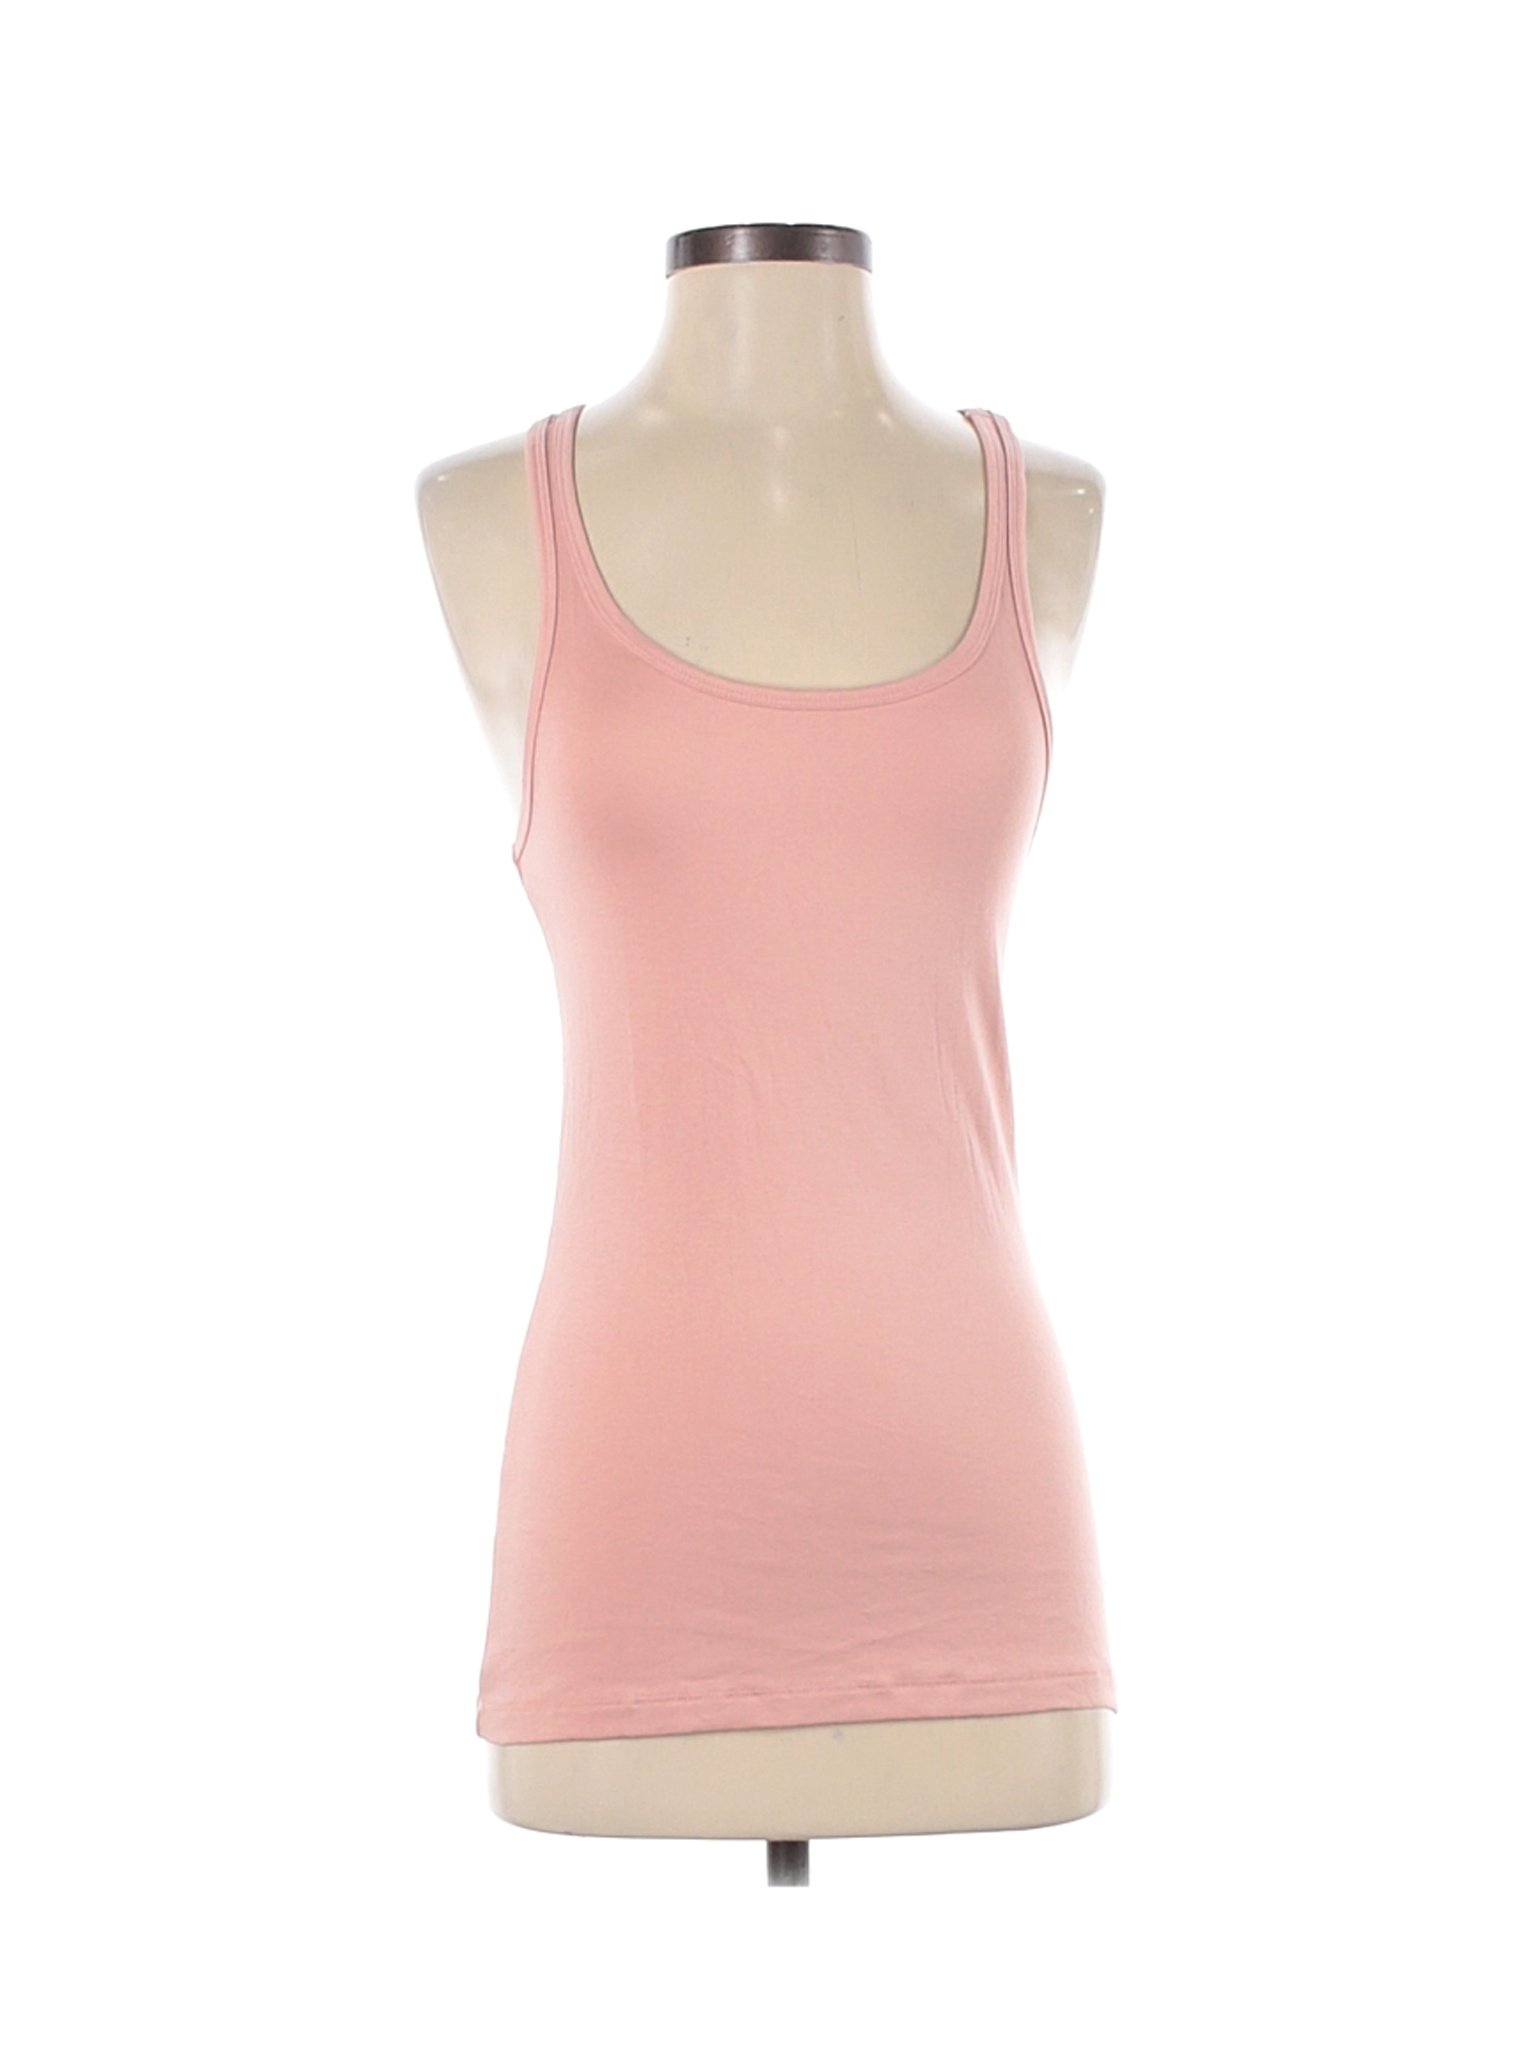 NWT A New Day Women Pink Tank Top S | eBay